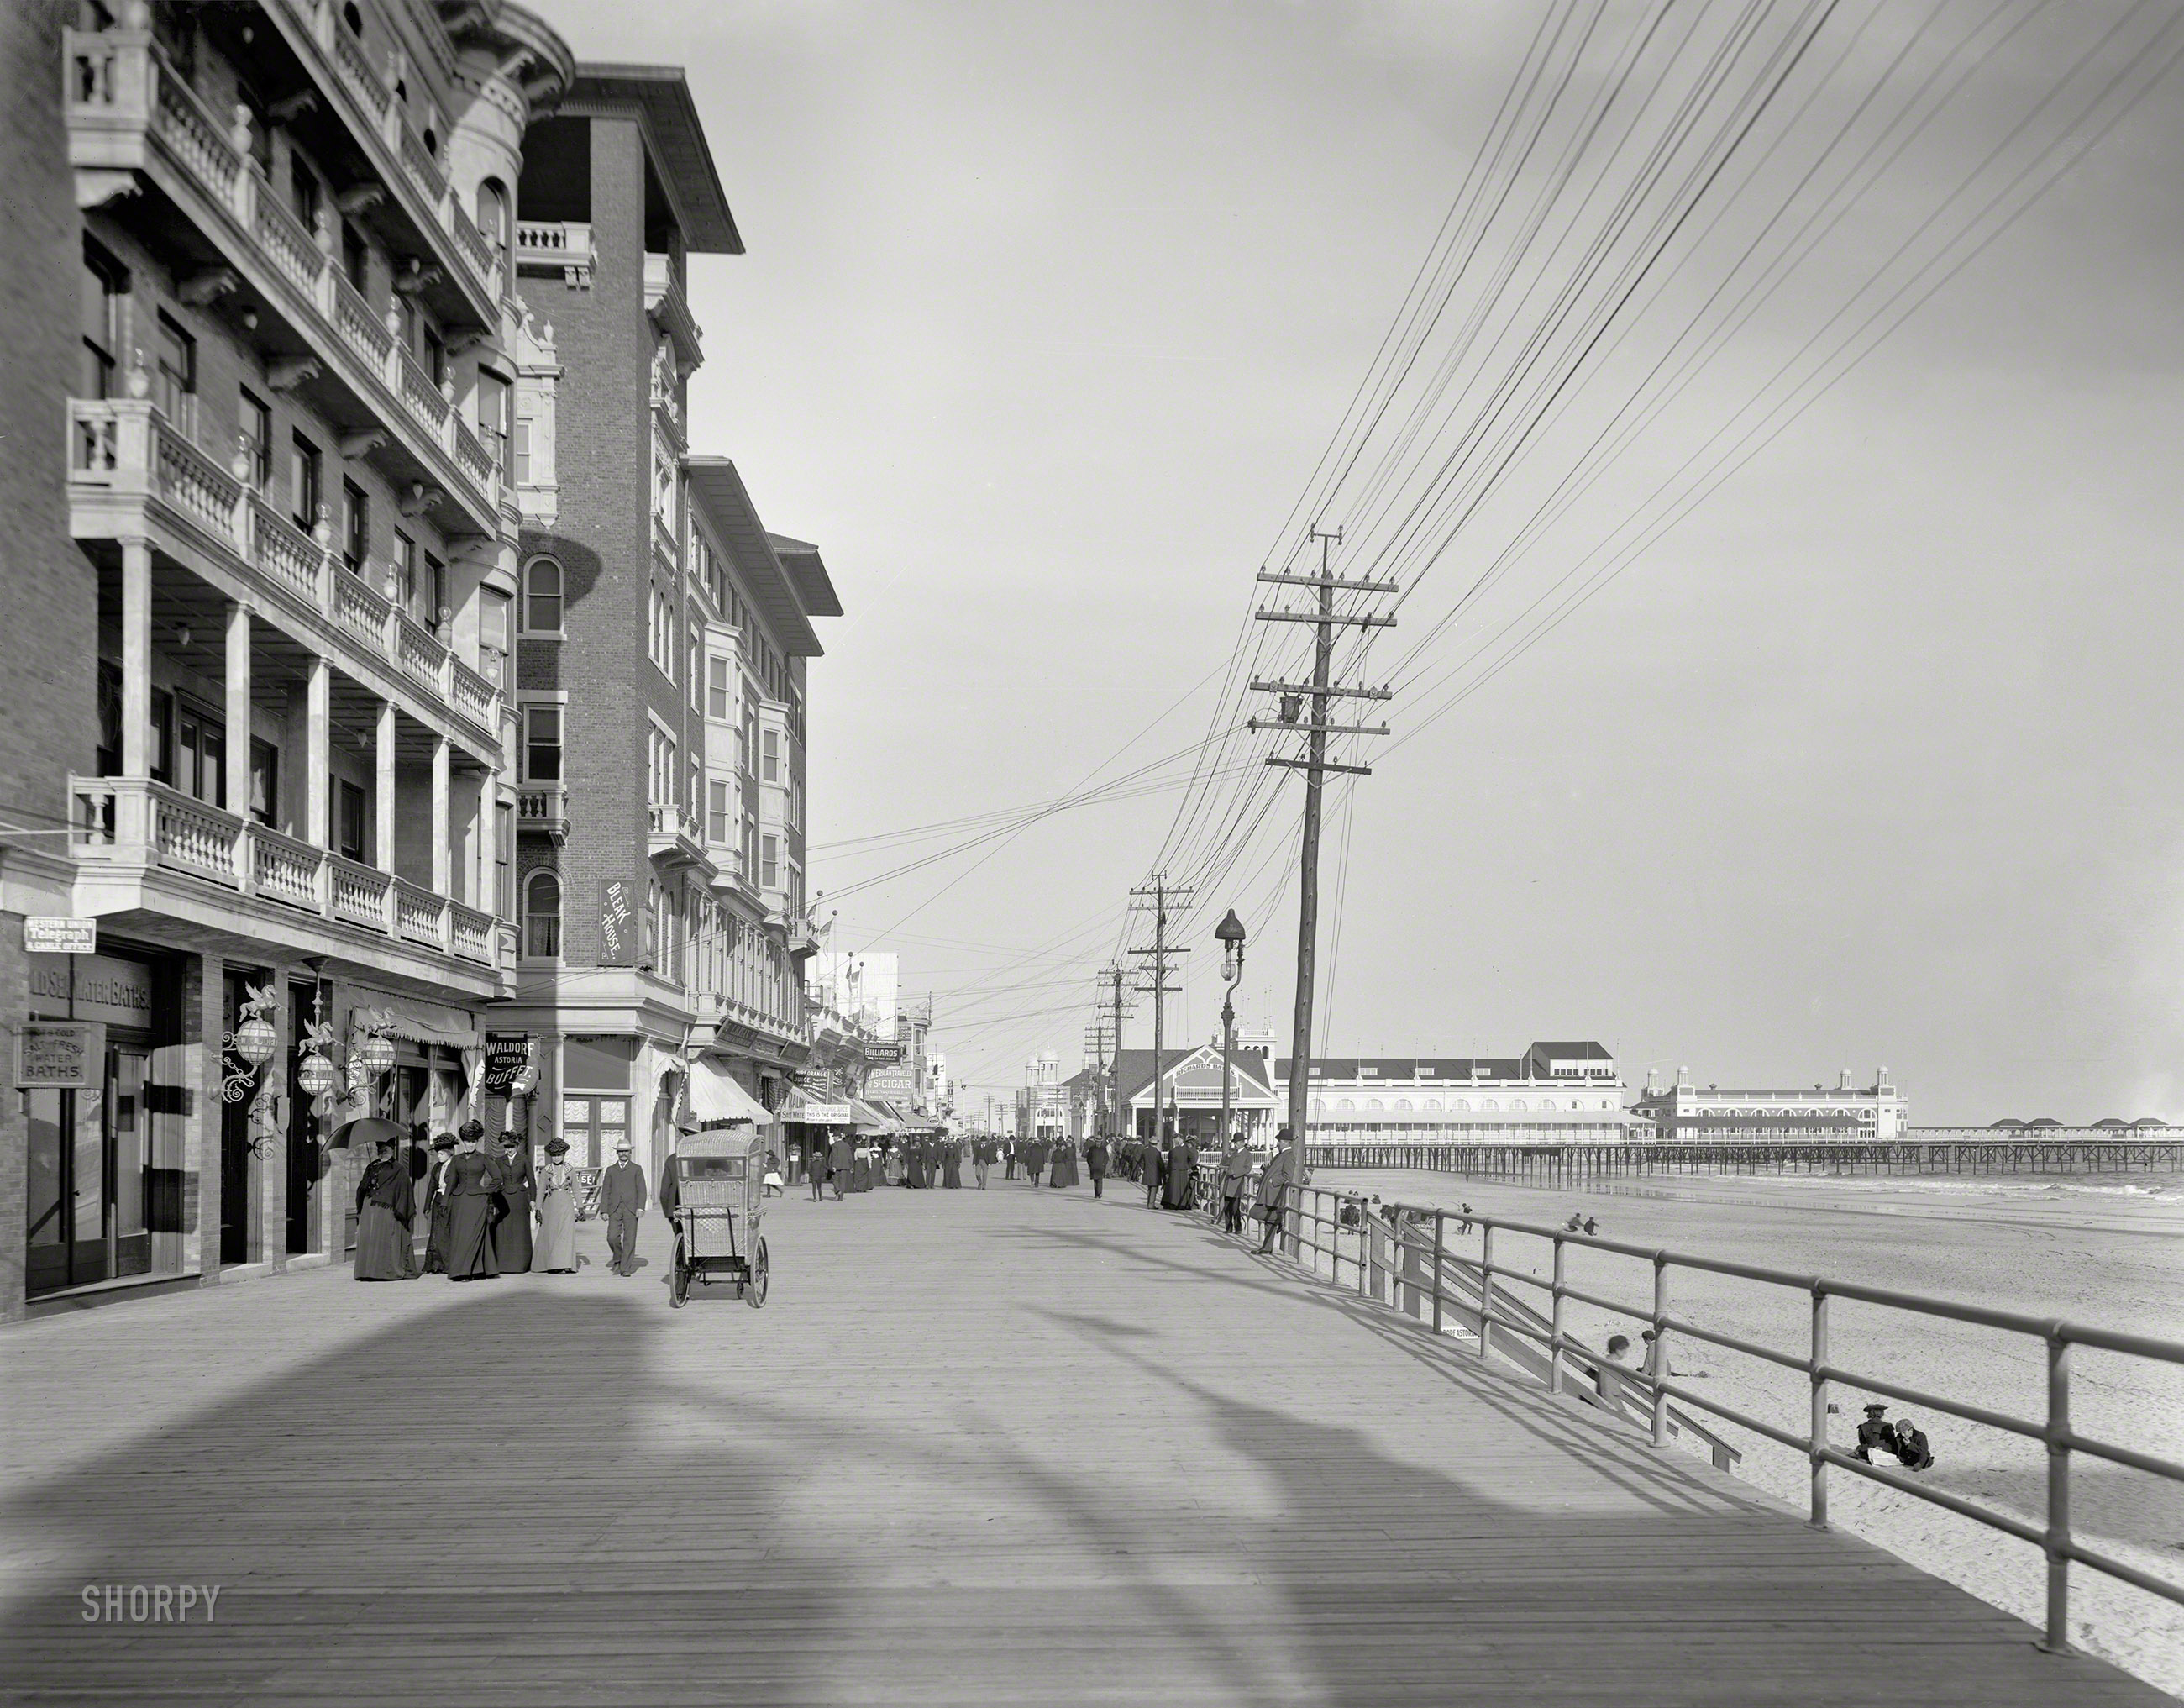 The Jersey Shore circa 1901. "The Boardwalk and Auditorium Pier, Atlantic City." At Ocean Avenue, George Coryell's Bleak House hotel. View full size.